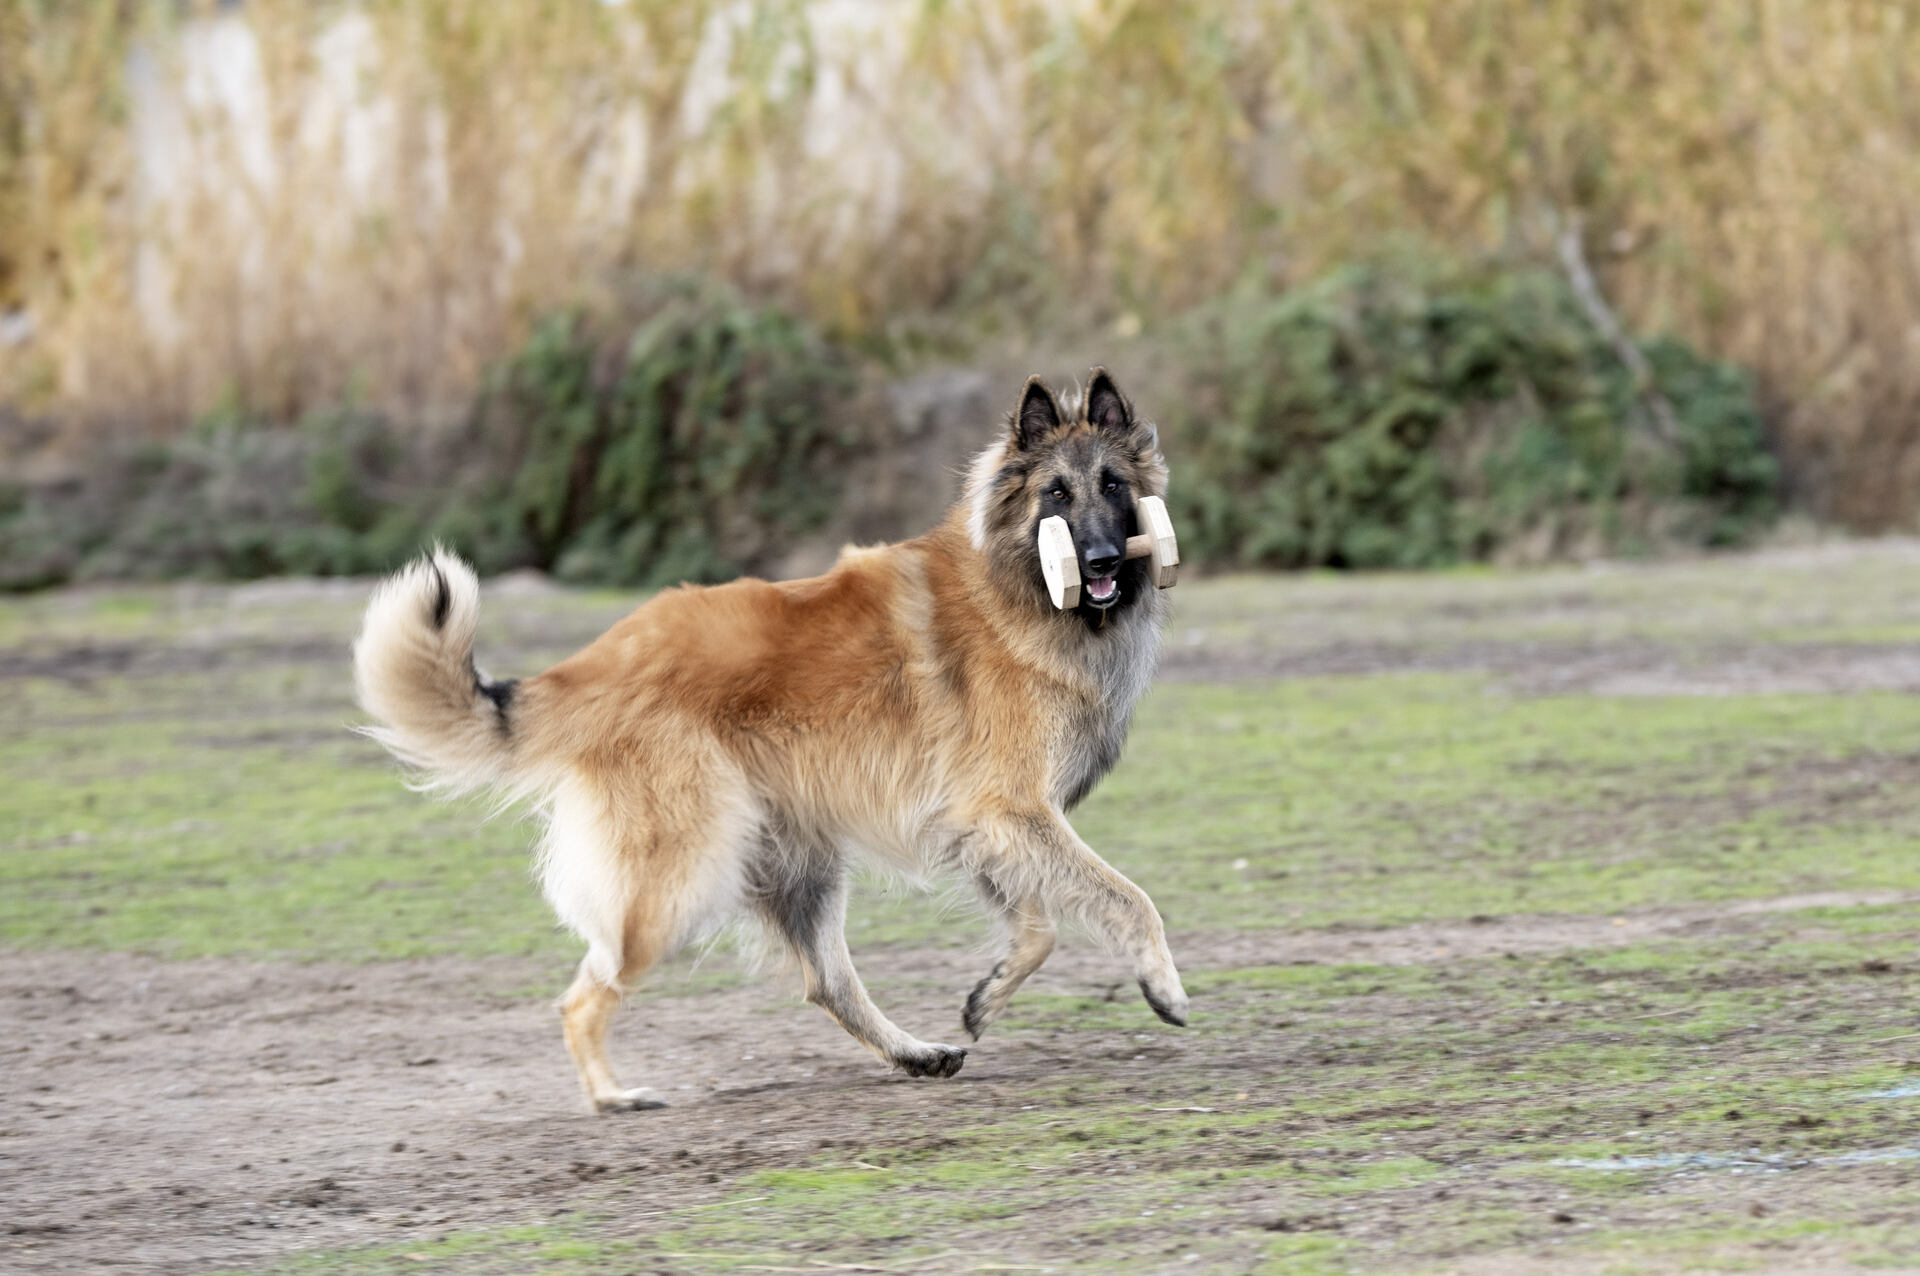 A Belgian Tervuren dog running outdoors with a toy in their mouth